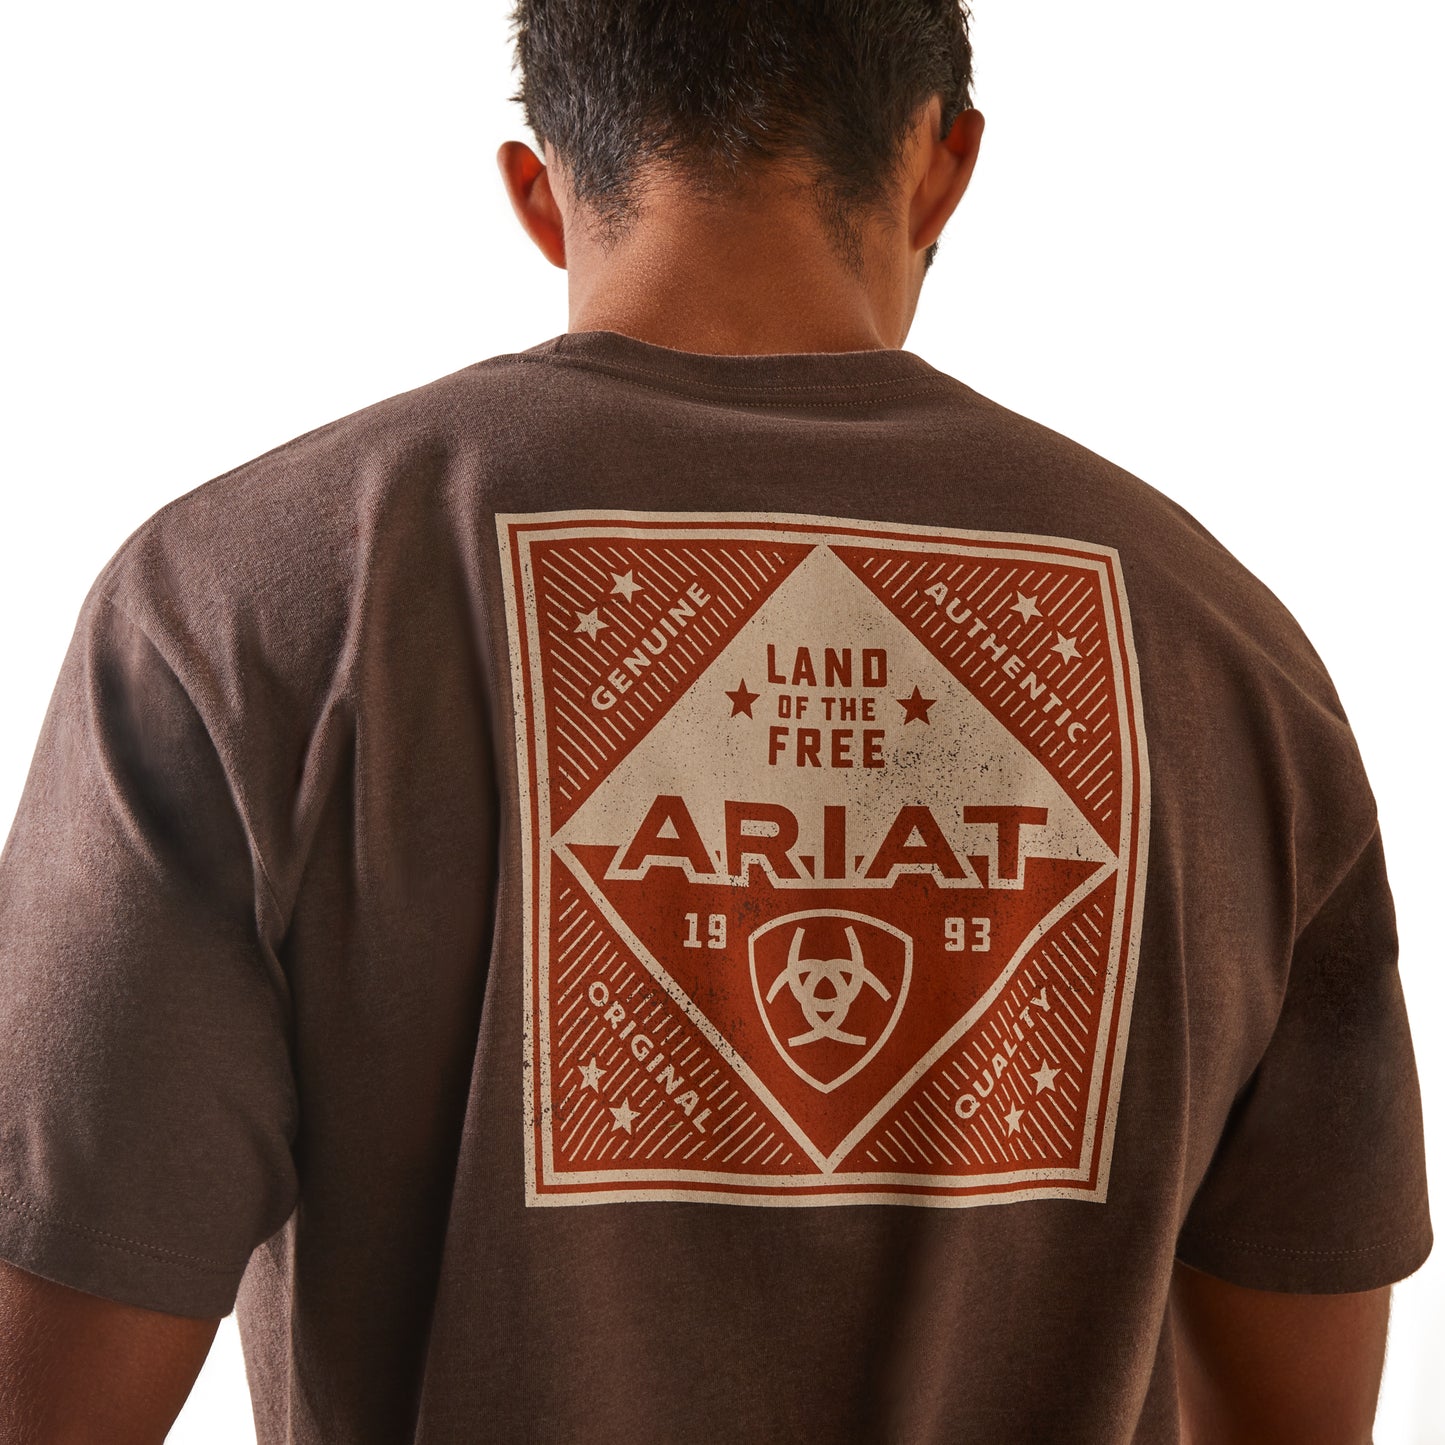 Ariat Patch Tee- Brown Heather